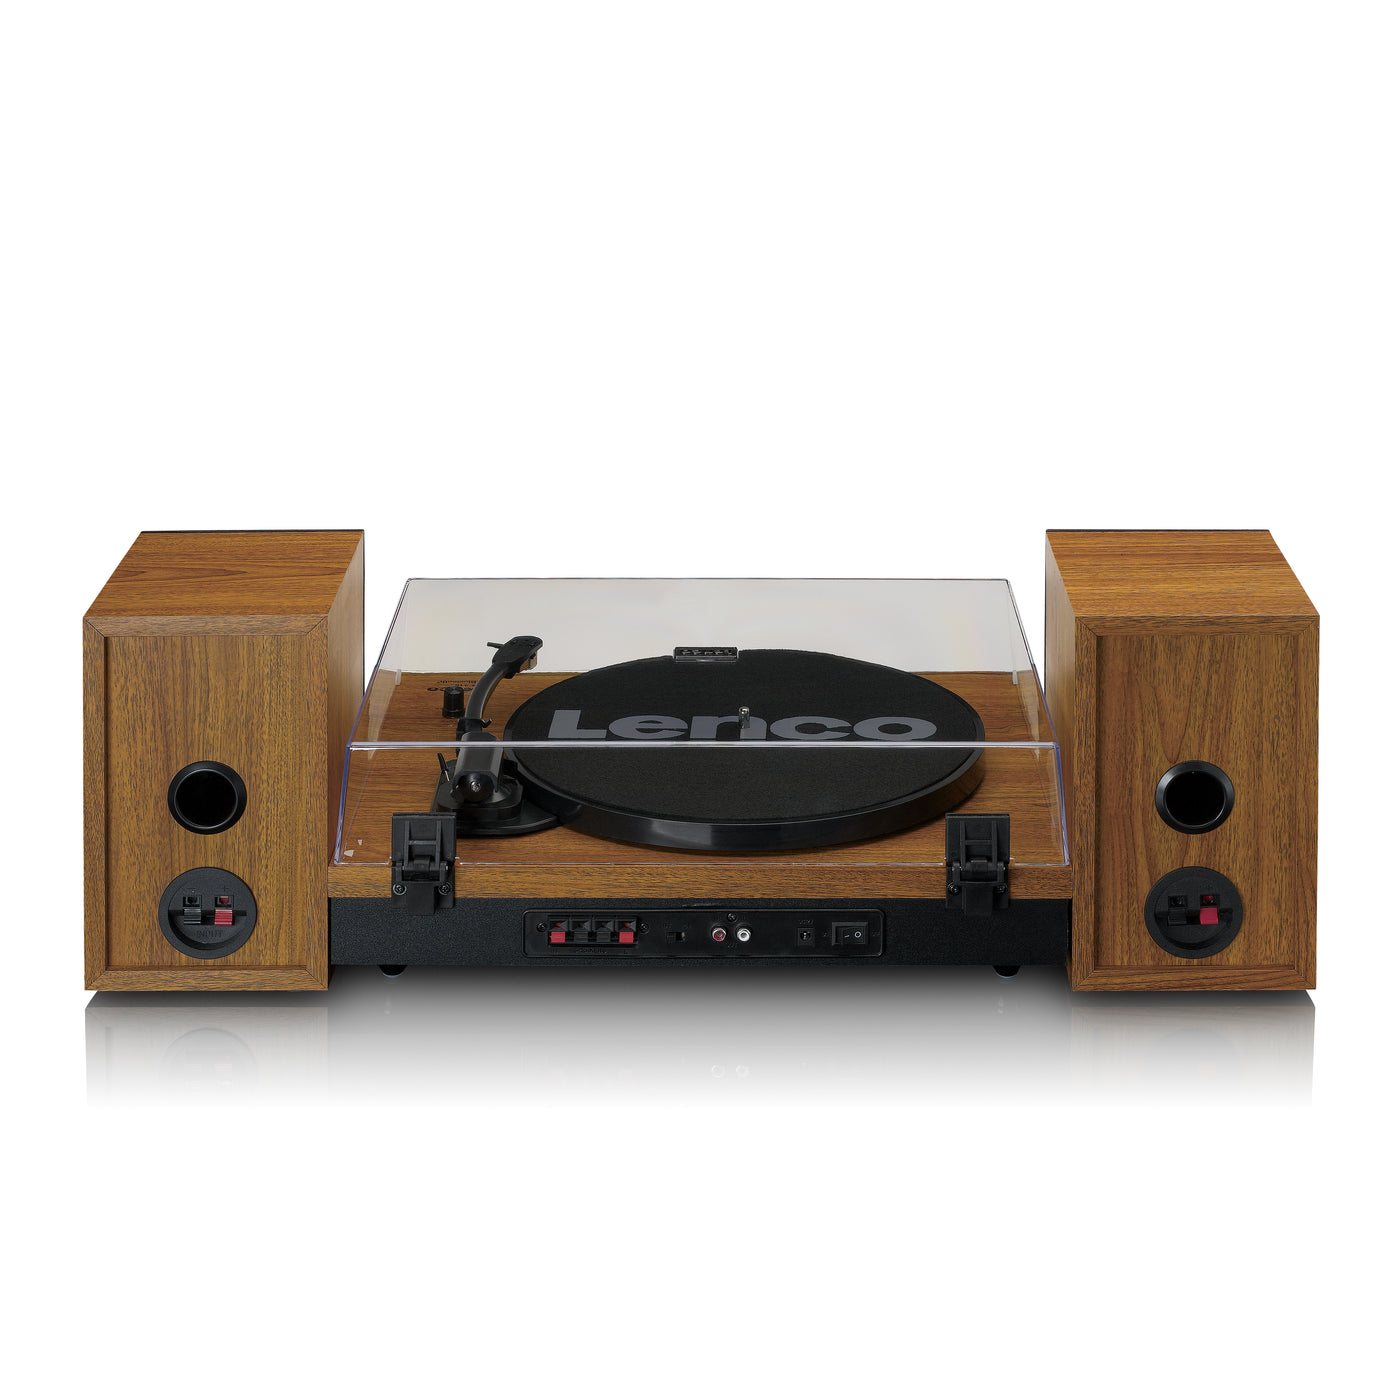 LENCO LS-310WD - Turntable with Bluetooth® and two separate speakers, –  Lenco-Catalog | Plattenspieler